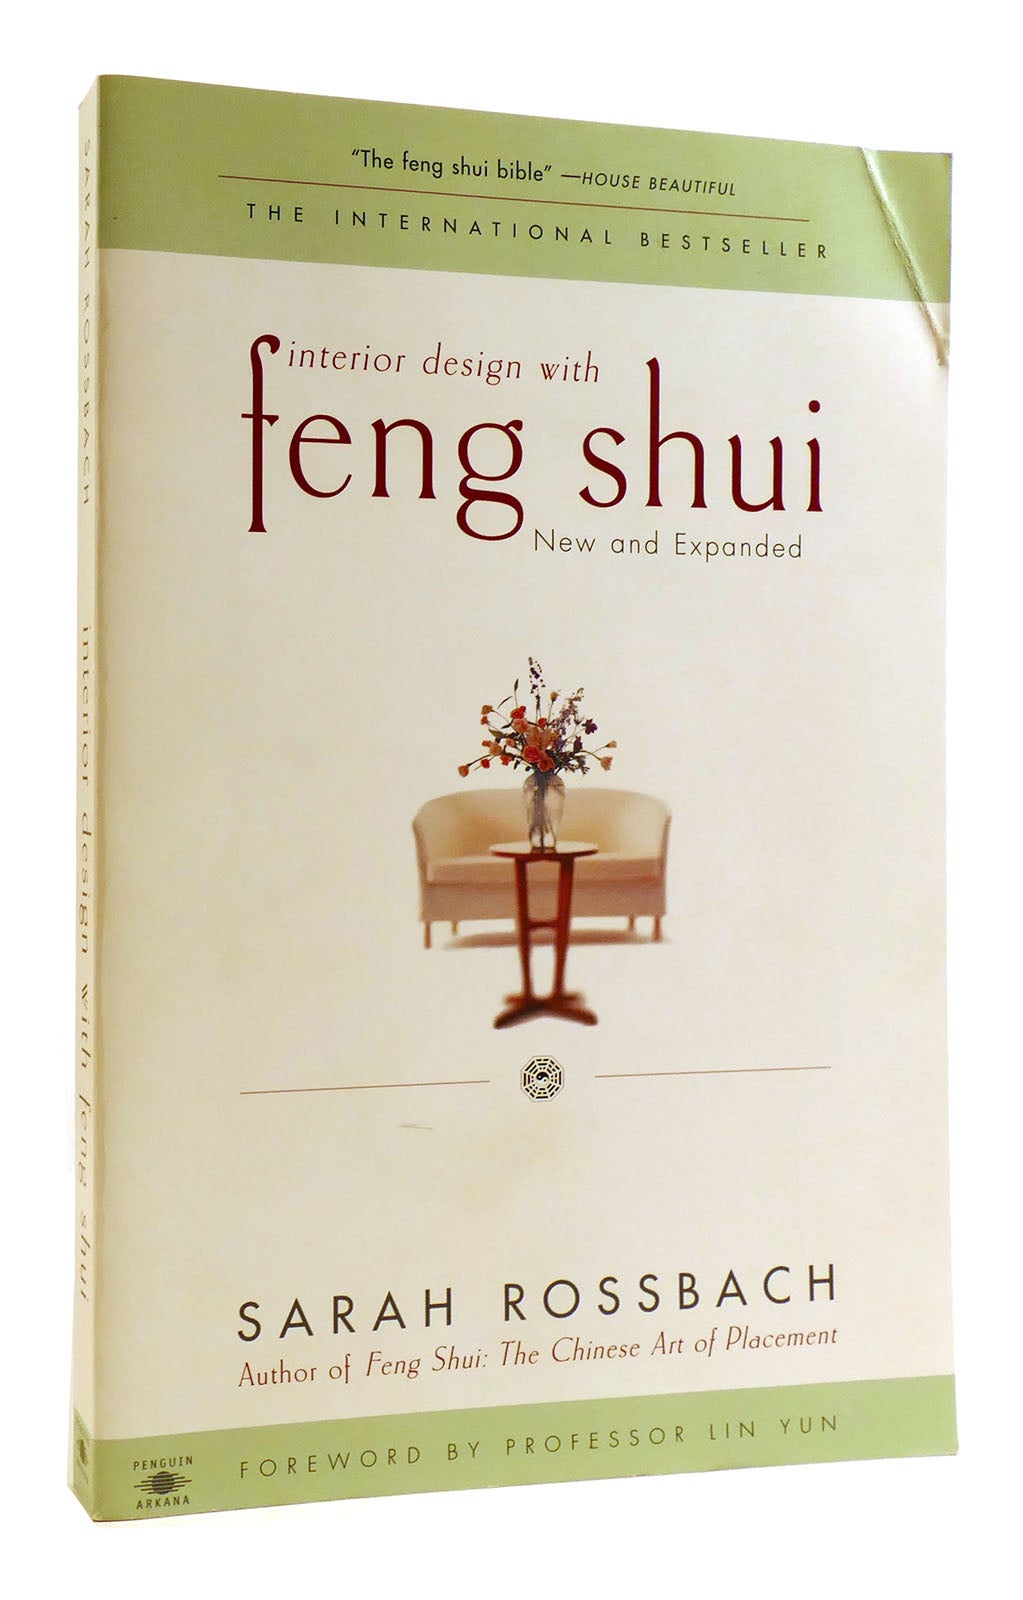 FENG SHUI | Sarah Rossbach | New and Expanded; First Printing